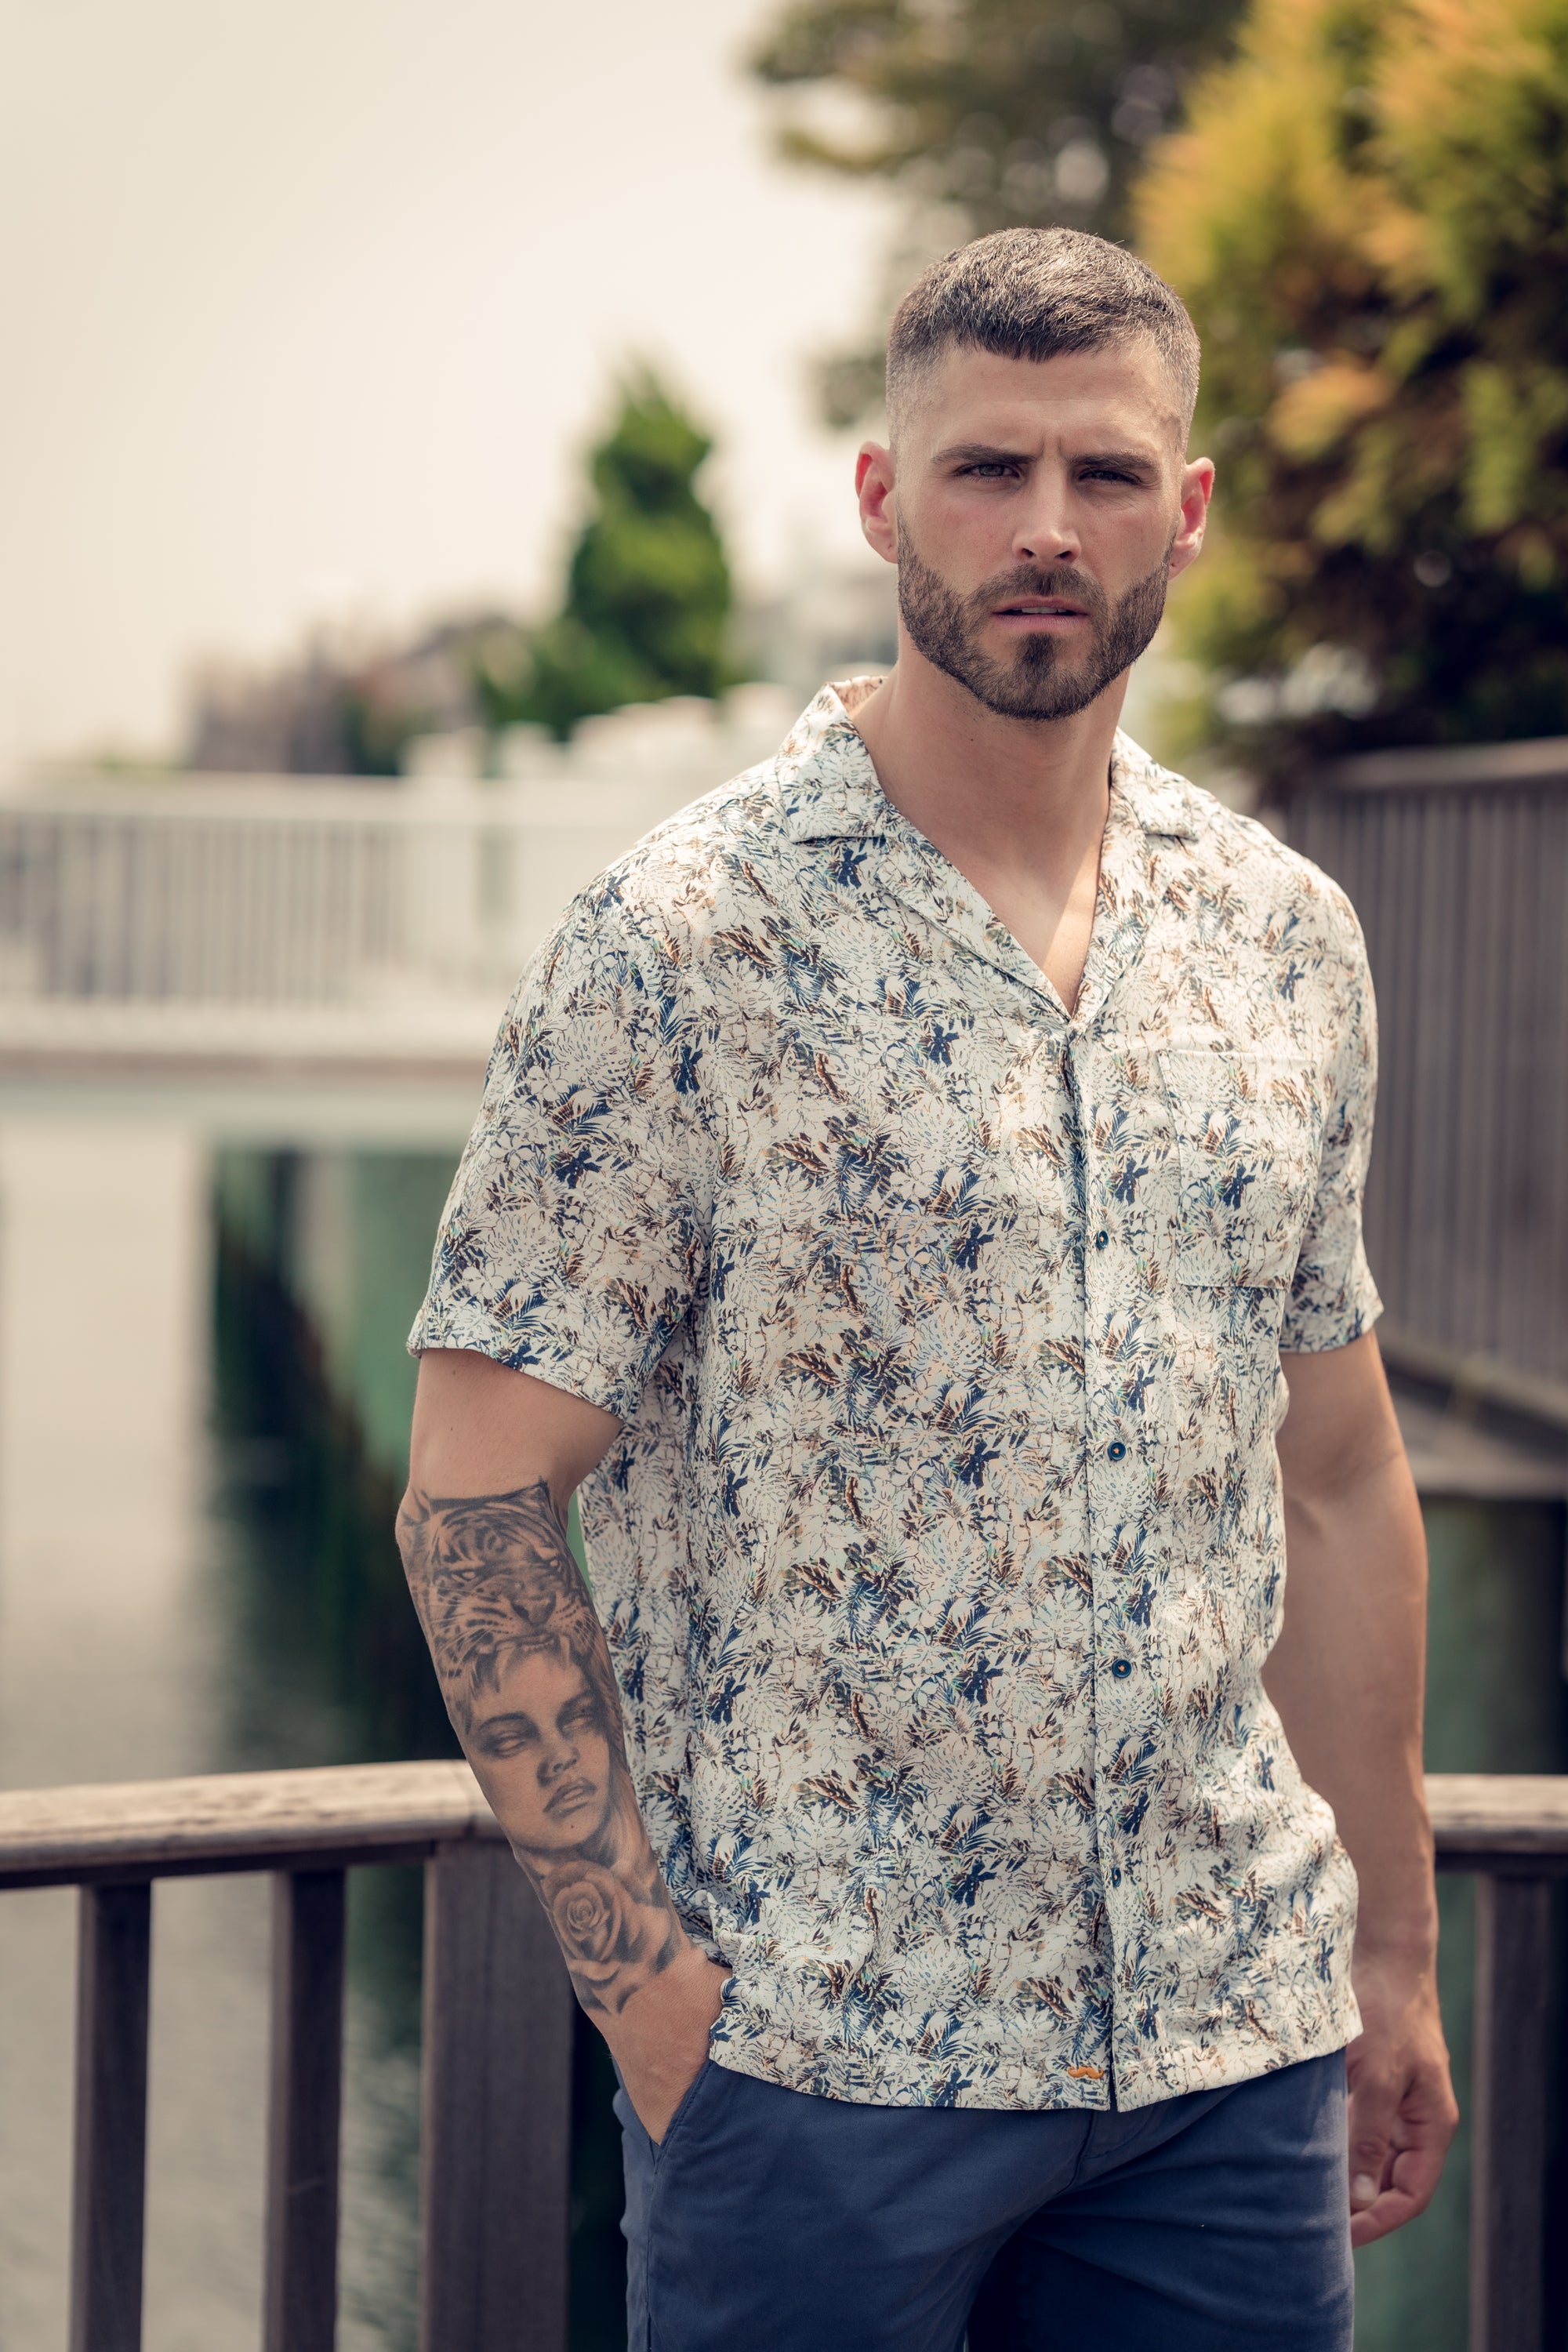 Floral Tropical Print in Camp Collar Model Short Sleeve Shirt